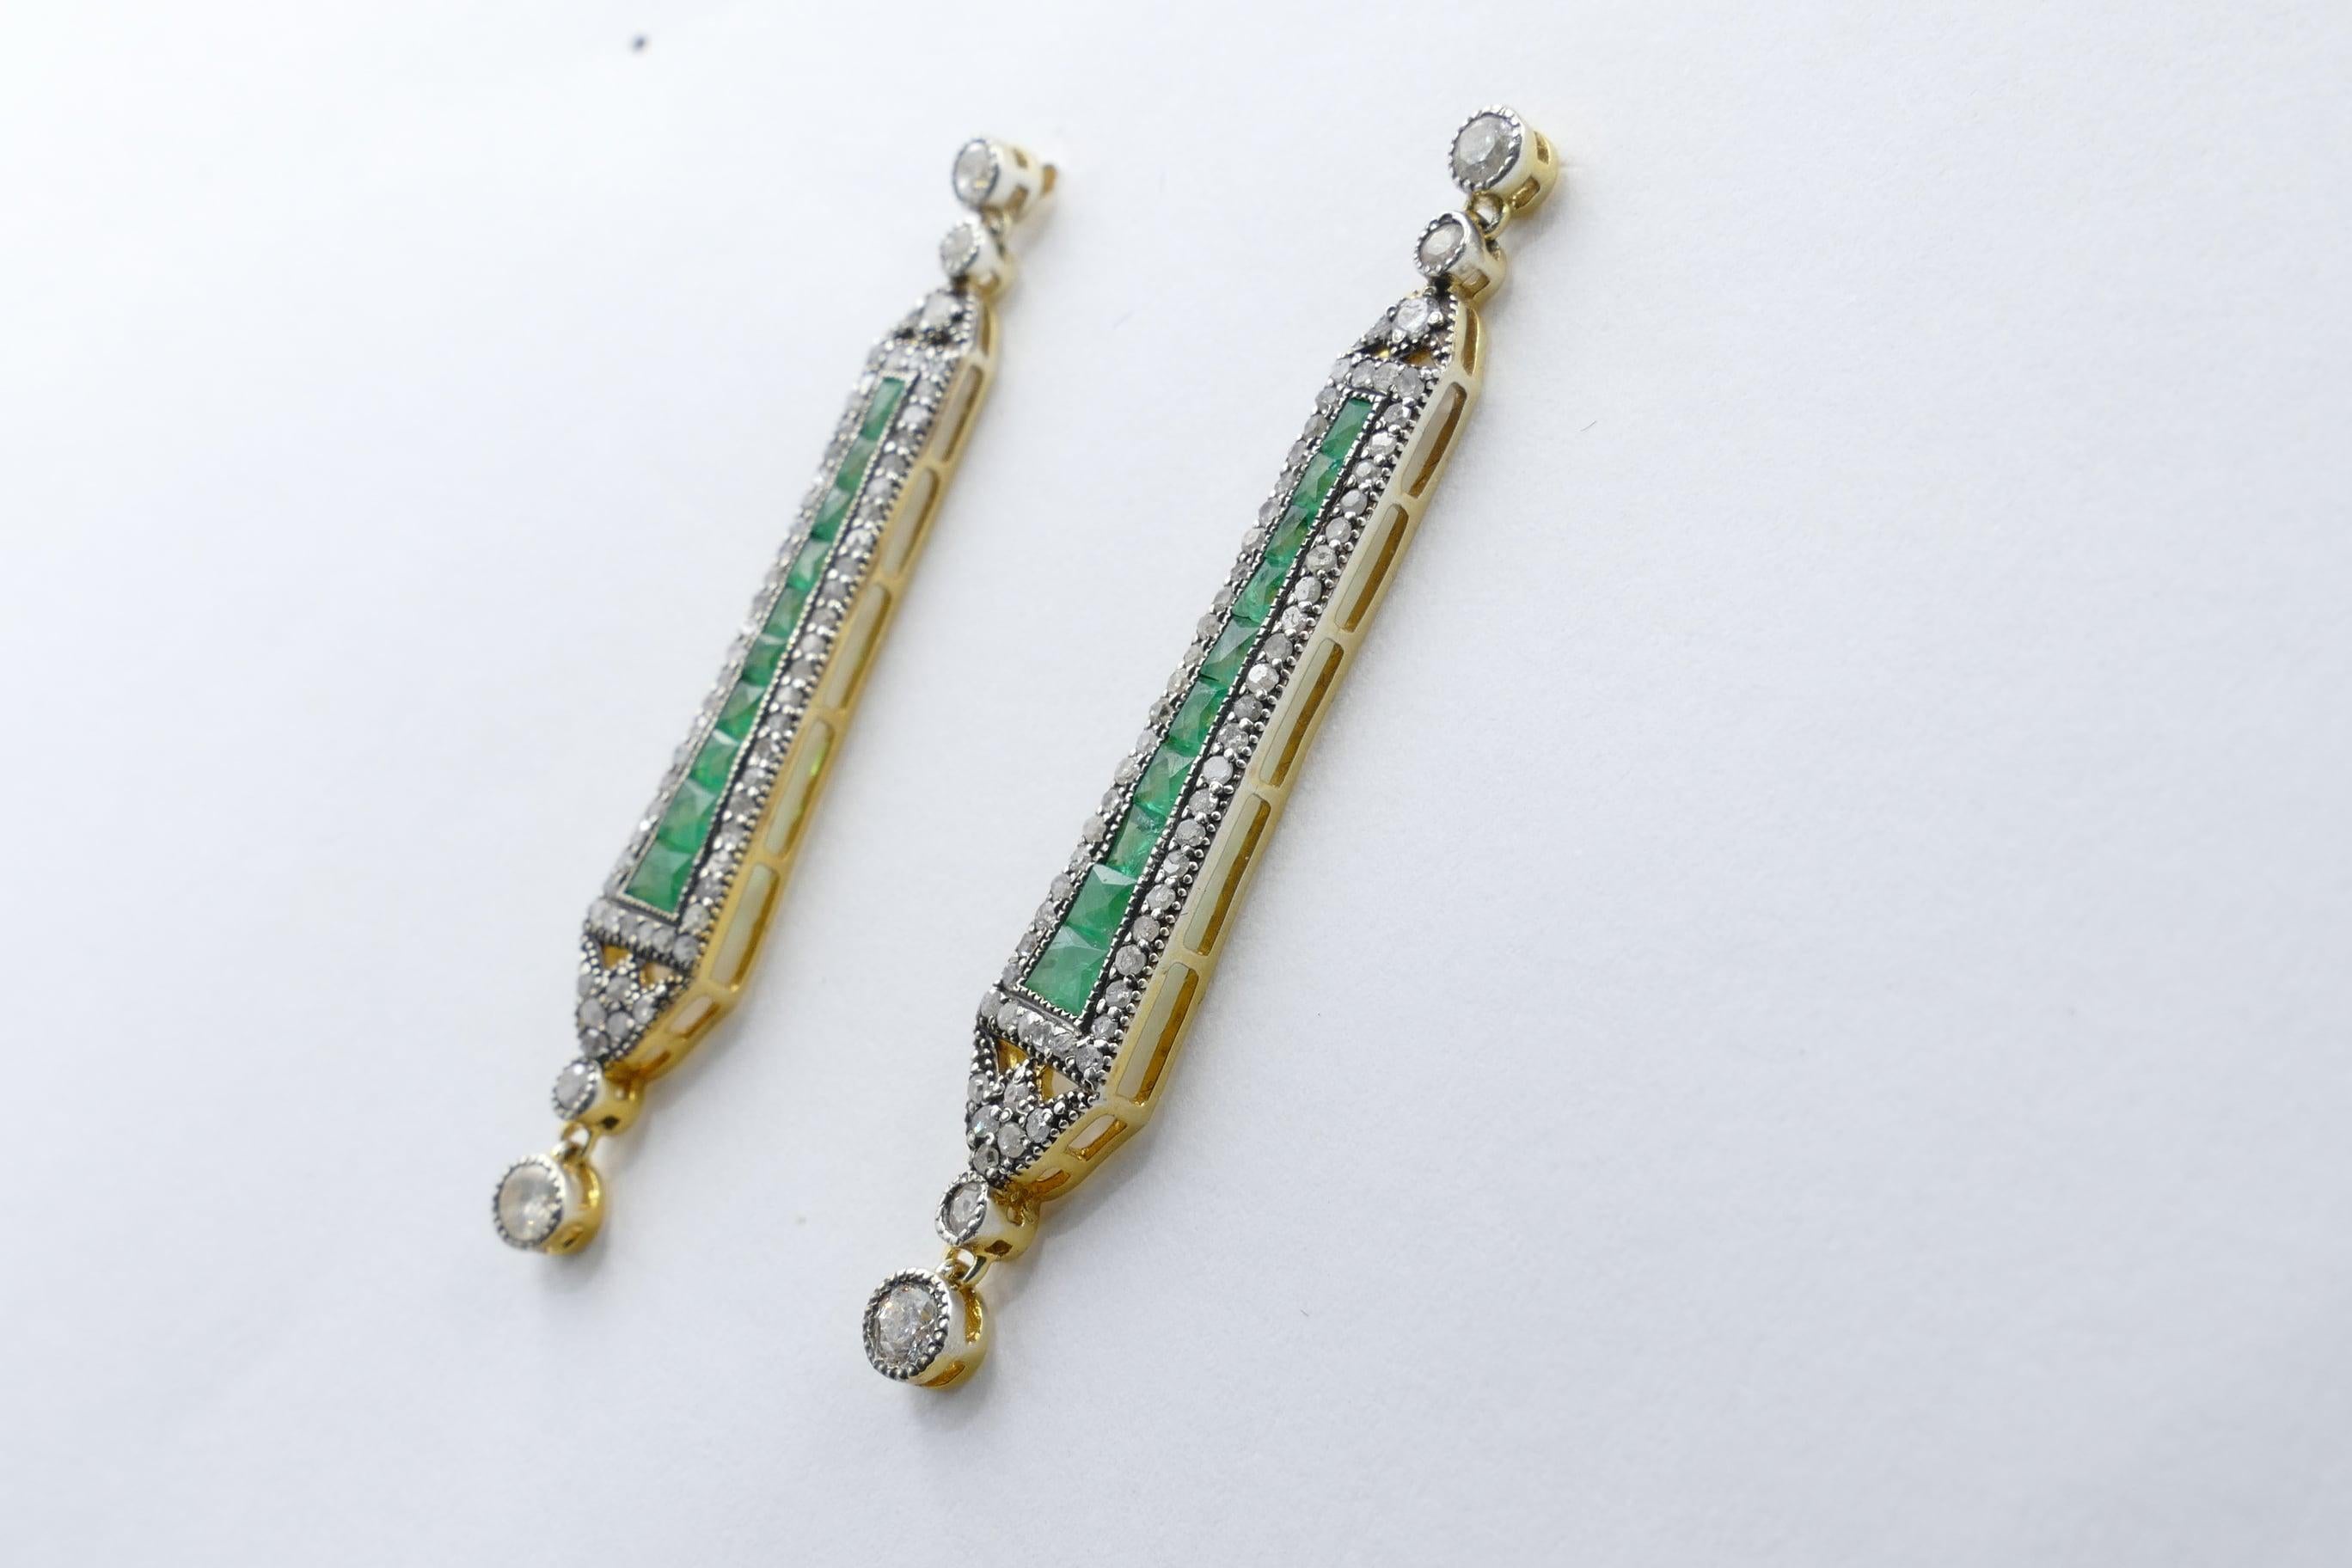 20 Emeralds, baguette cut, channel set, bluish-green in colour form the main feature of these very modern earrings.
There are also 116 round brilliant cut Diamonds as well as another 10 Diamonds milligrain set, the total weighing close to 1mcarat of